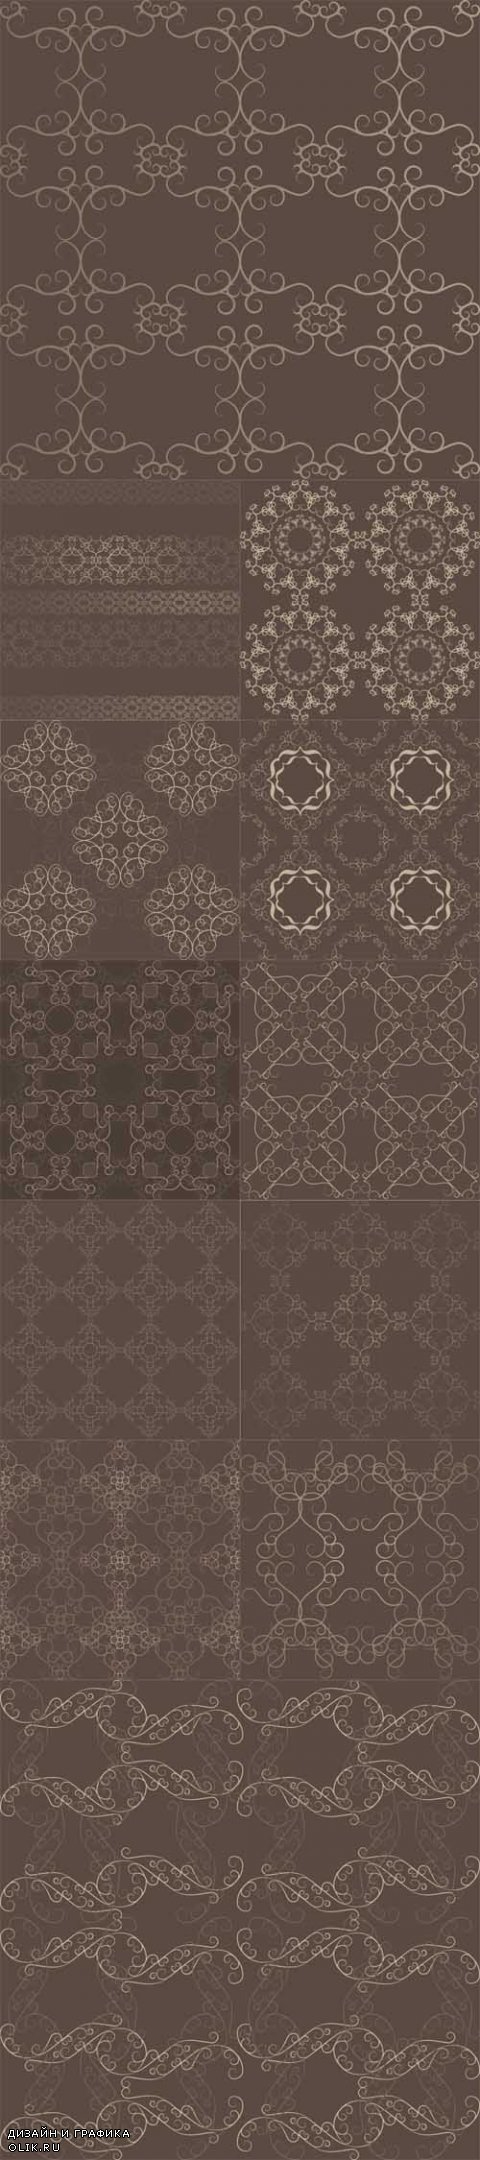 Vector Abstract Victorian Orient Ethnic Patterns